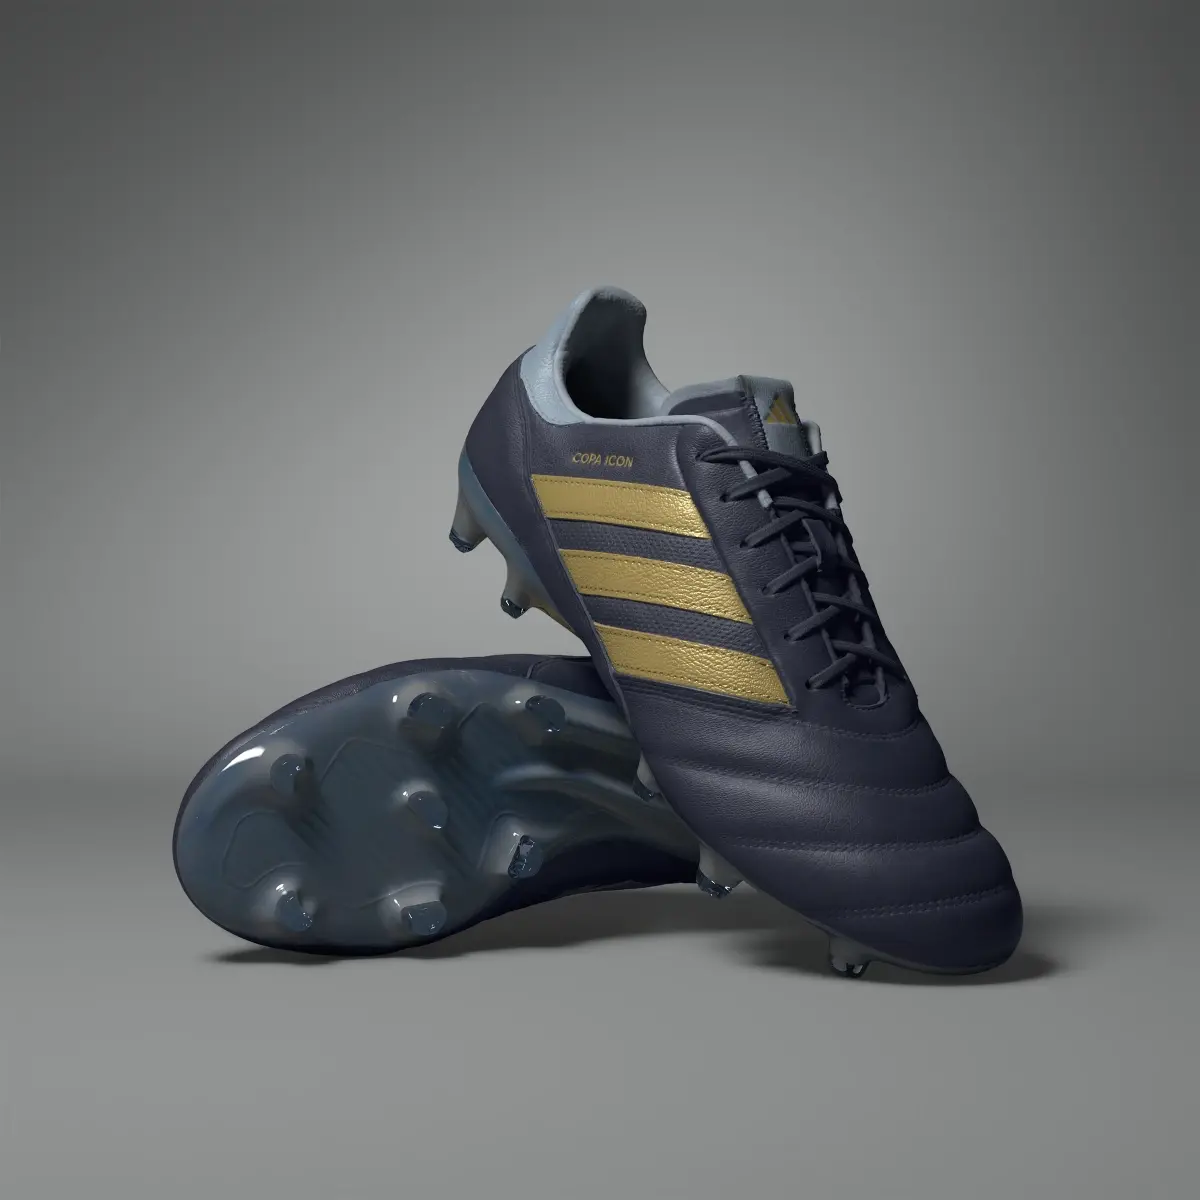 Adidas Copa Icon Firm Ground Boots. 1